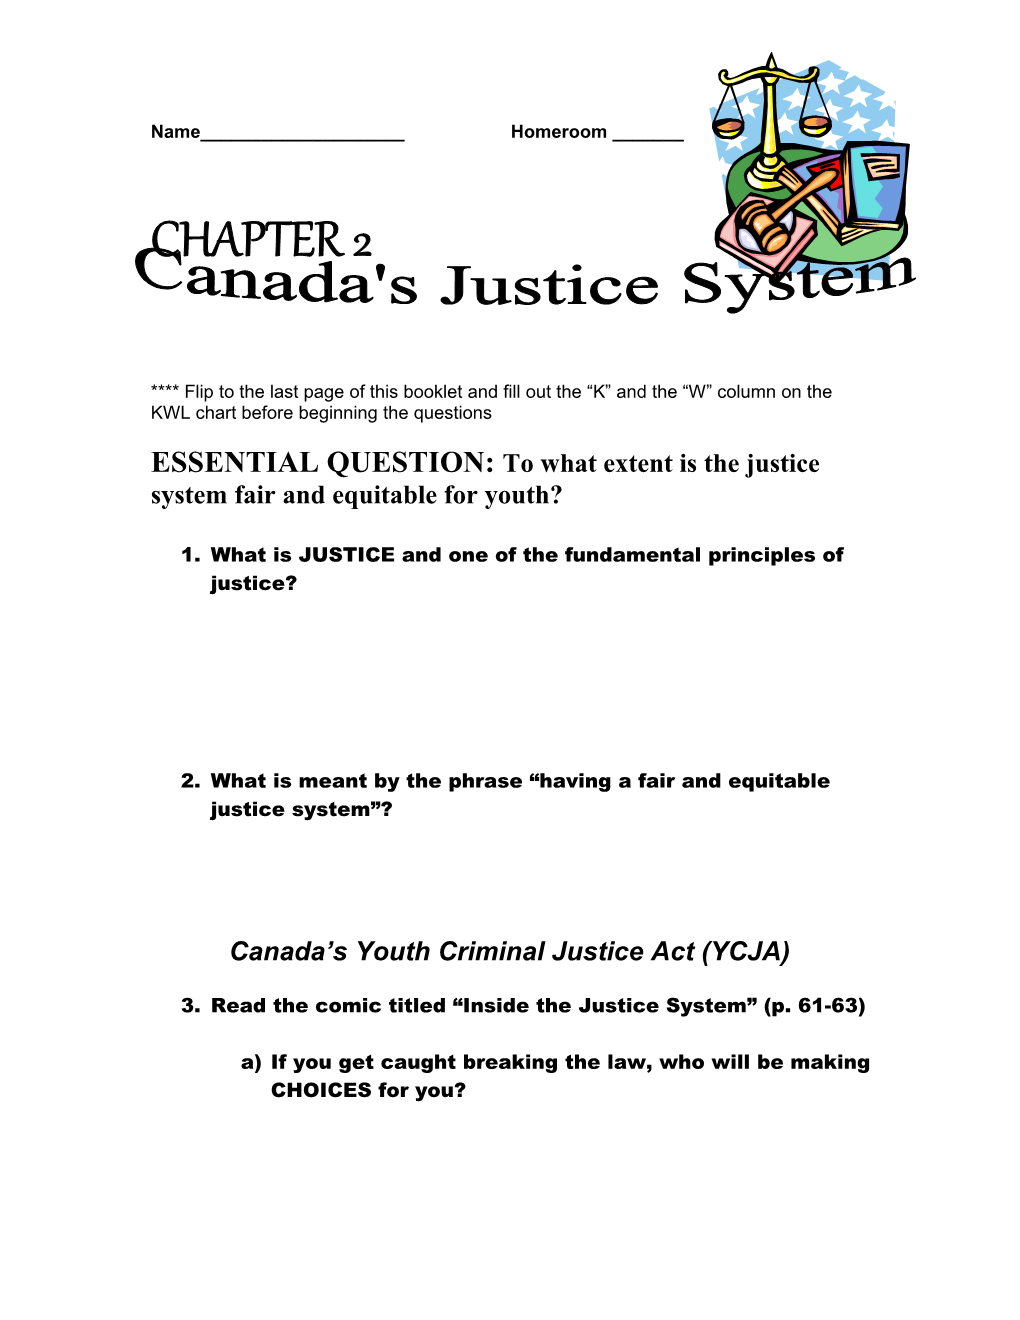 ESSENTIAL QUESTION: to What Extent Is the Justice System Fair and Equitable for Youth?